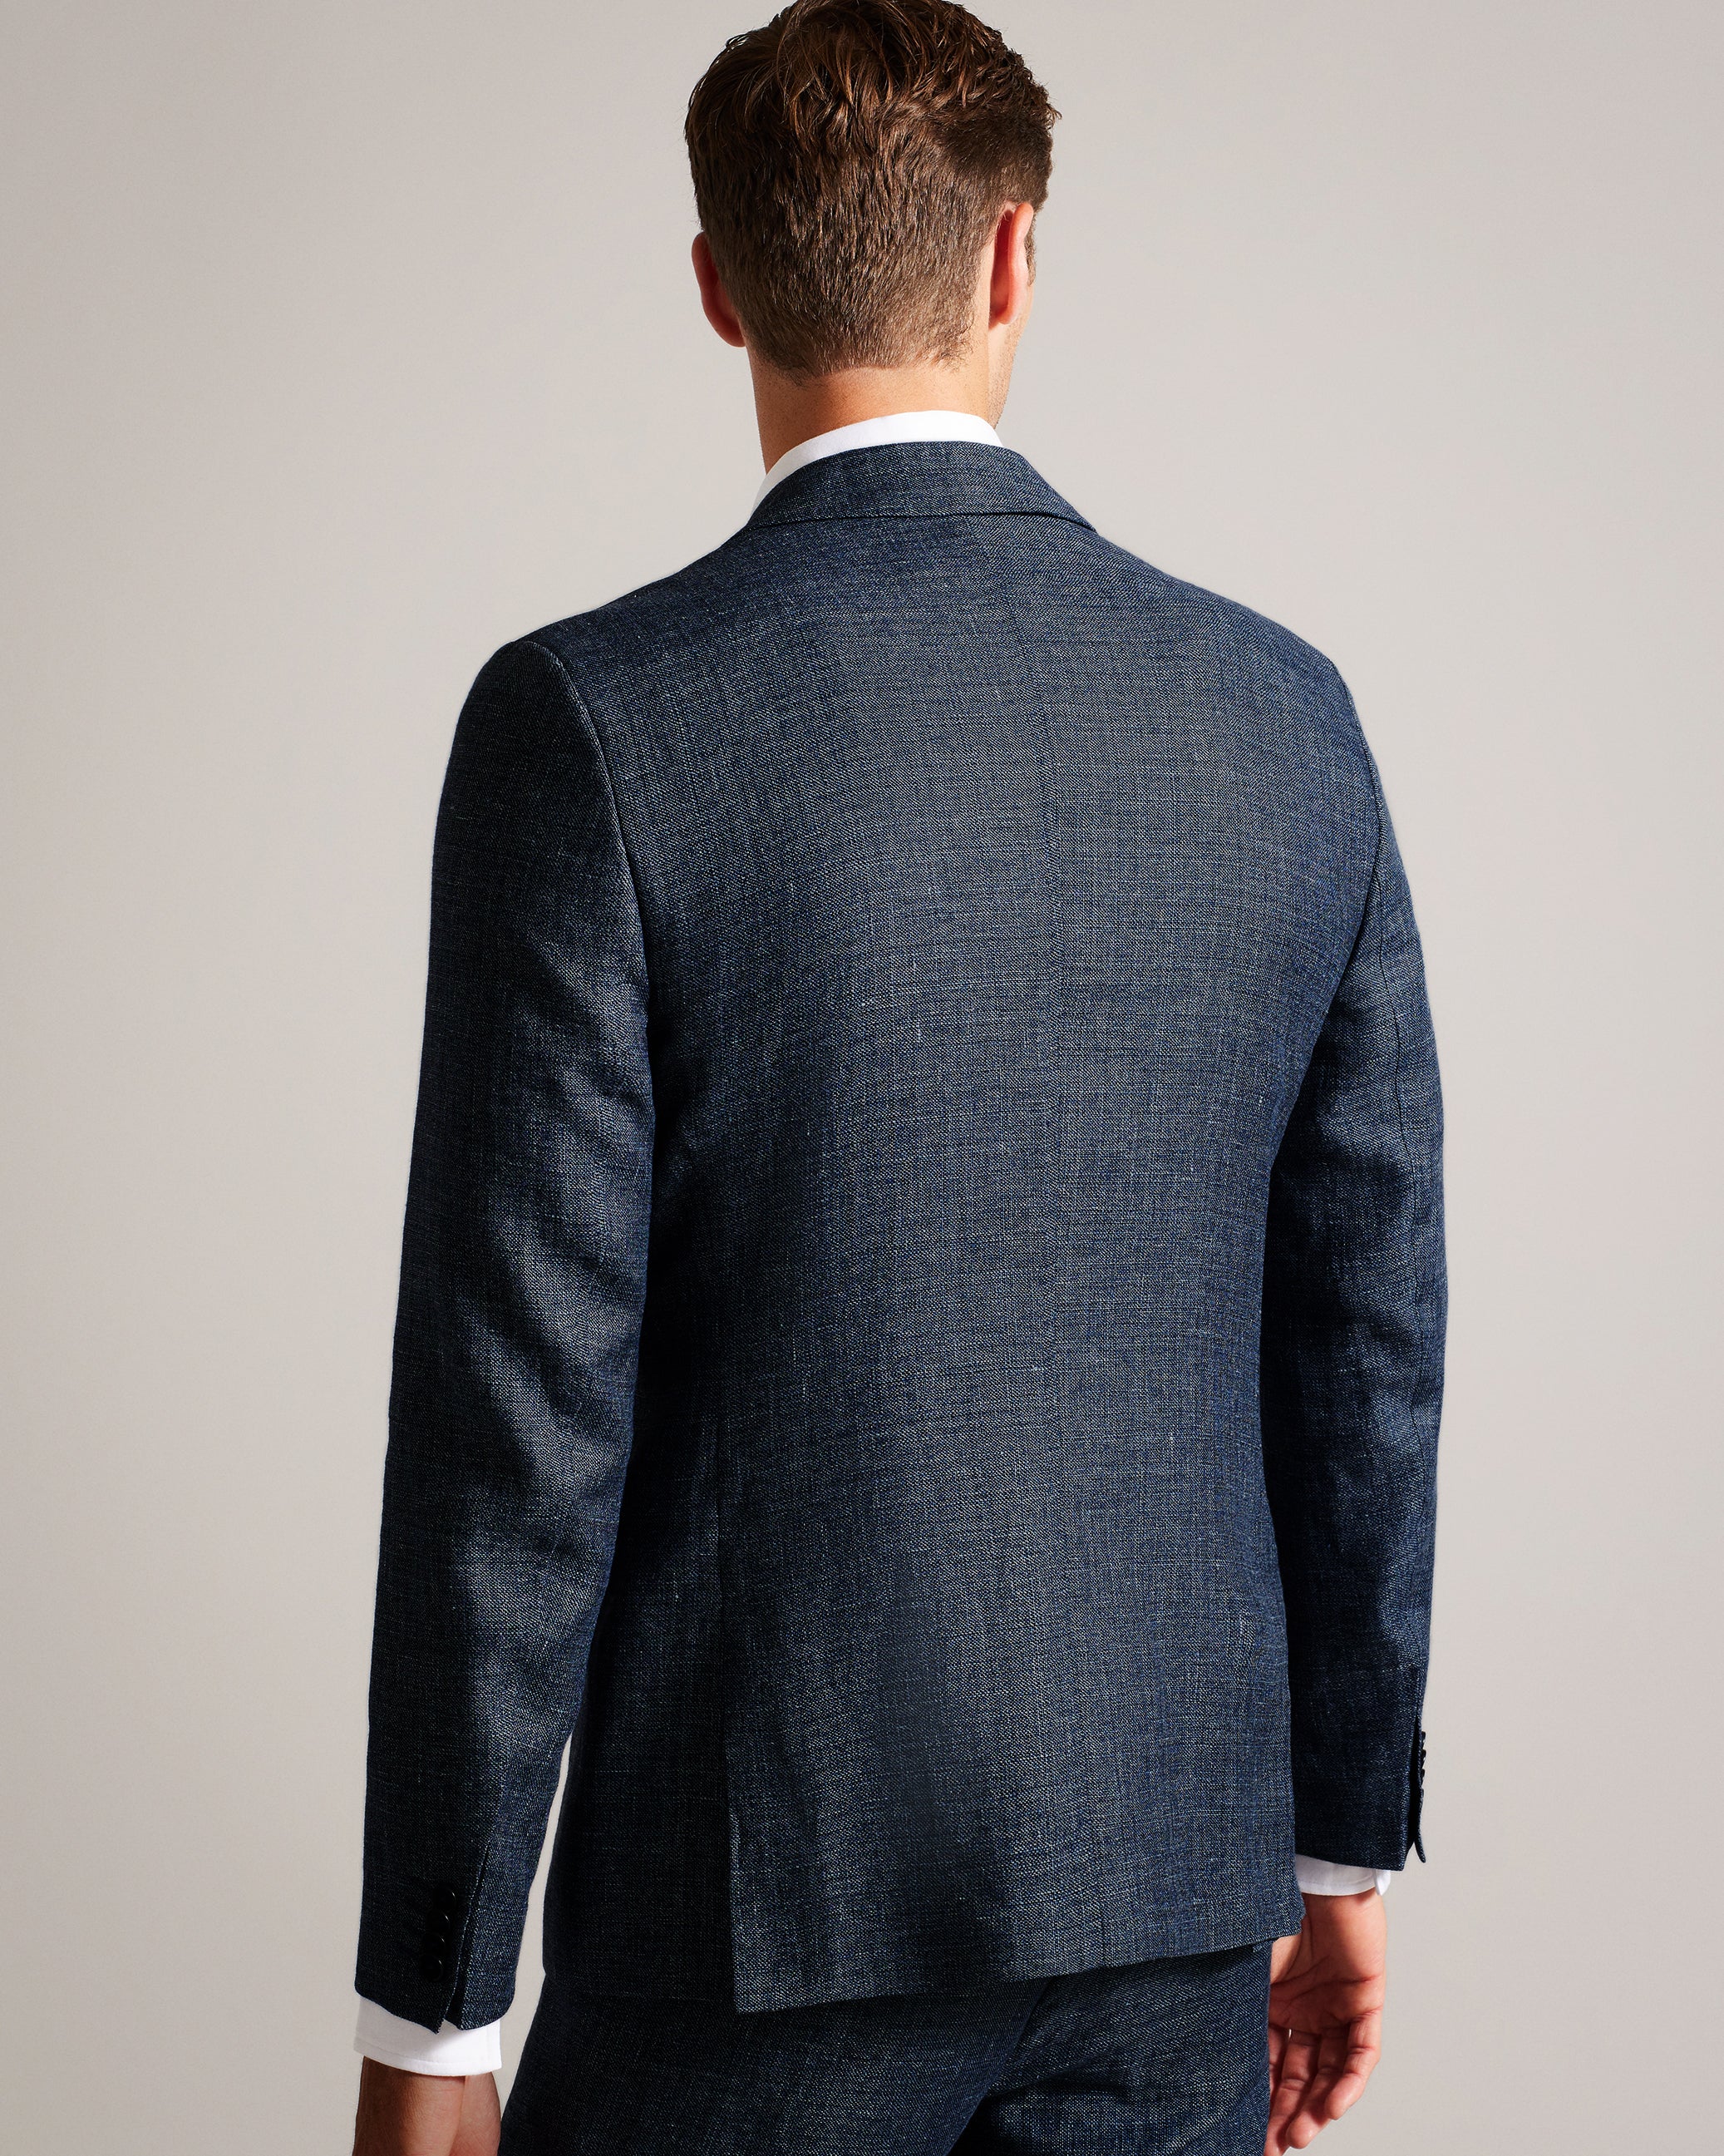 Tyrusj Slim Fit Linen And Wool Suit Jacket Navy